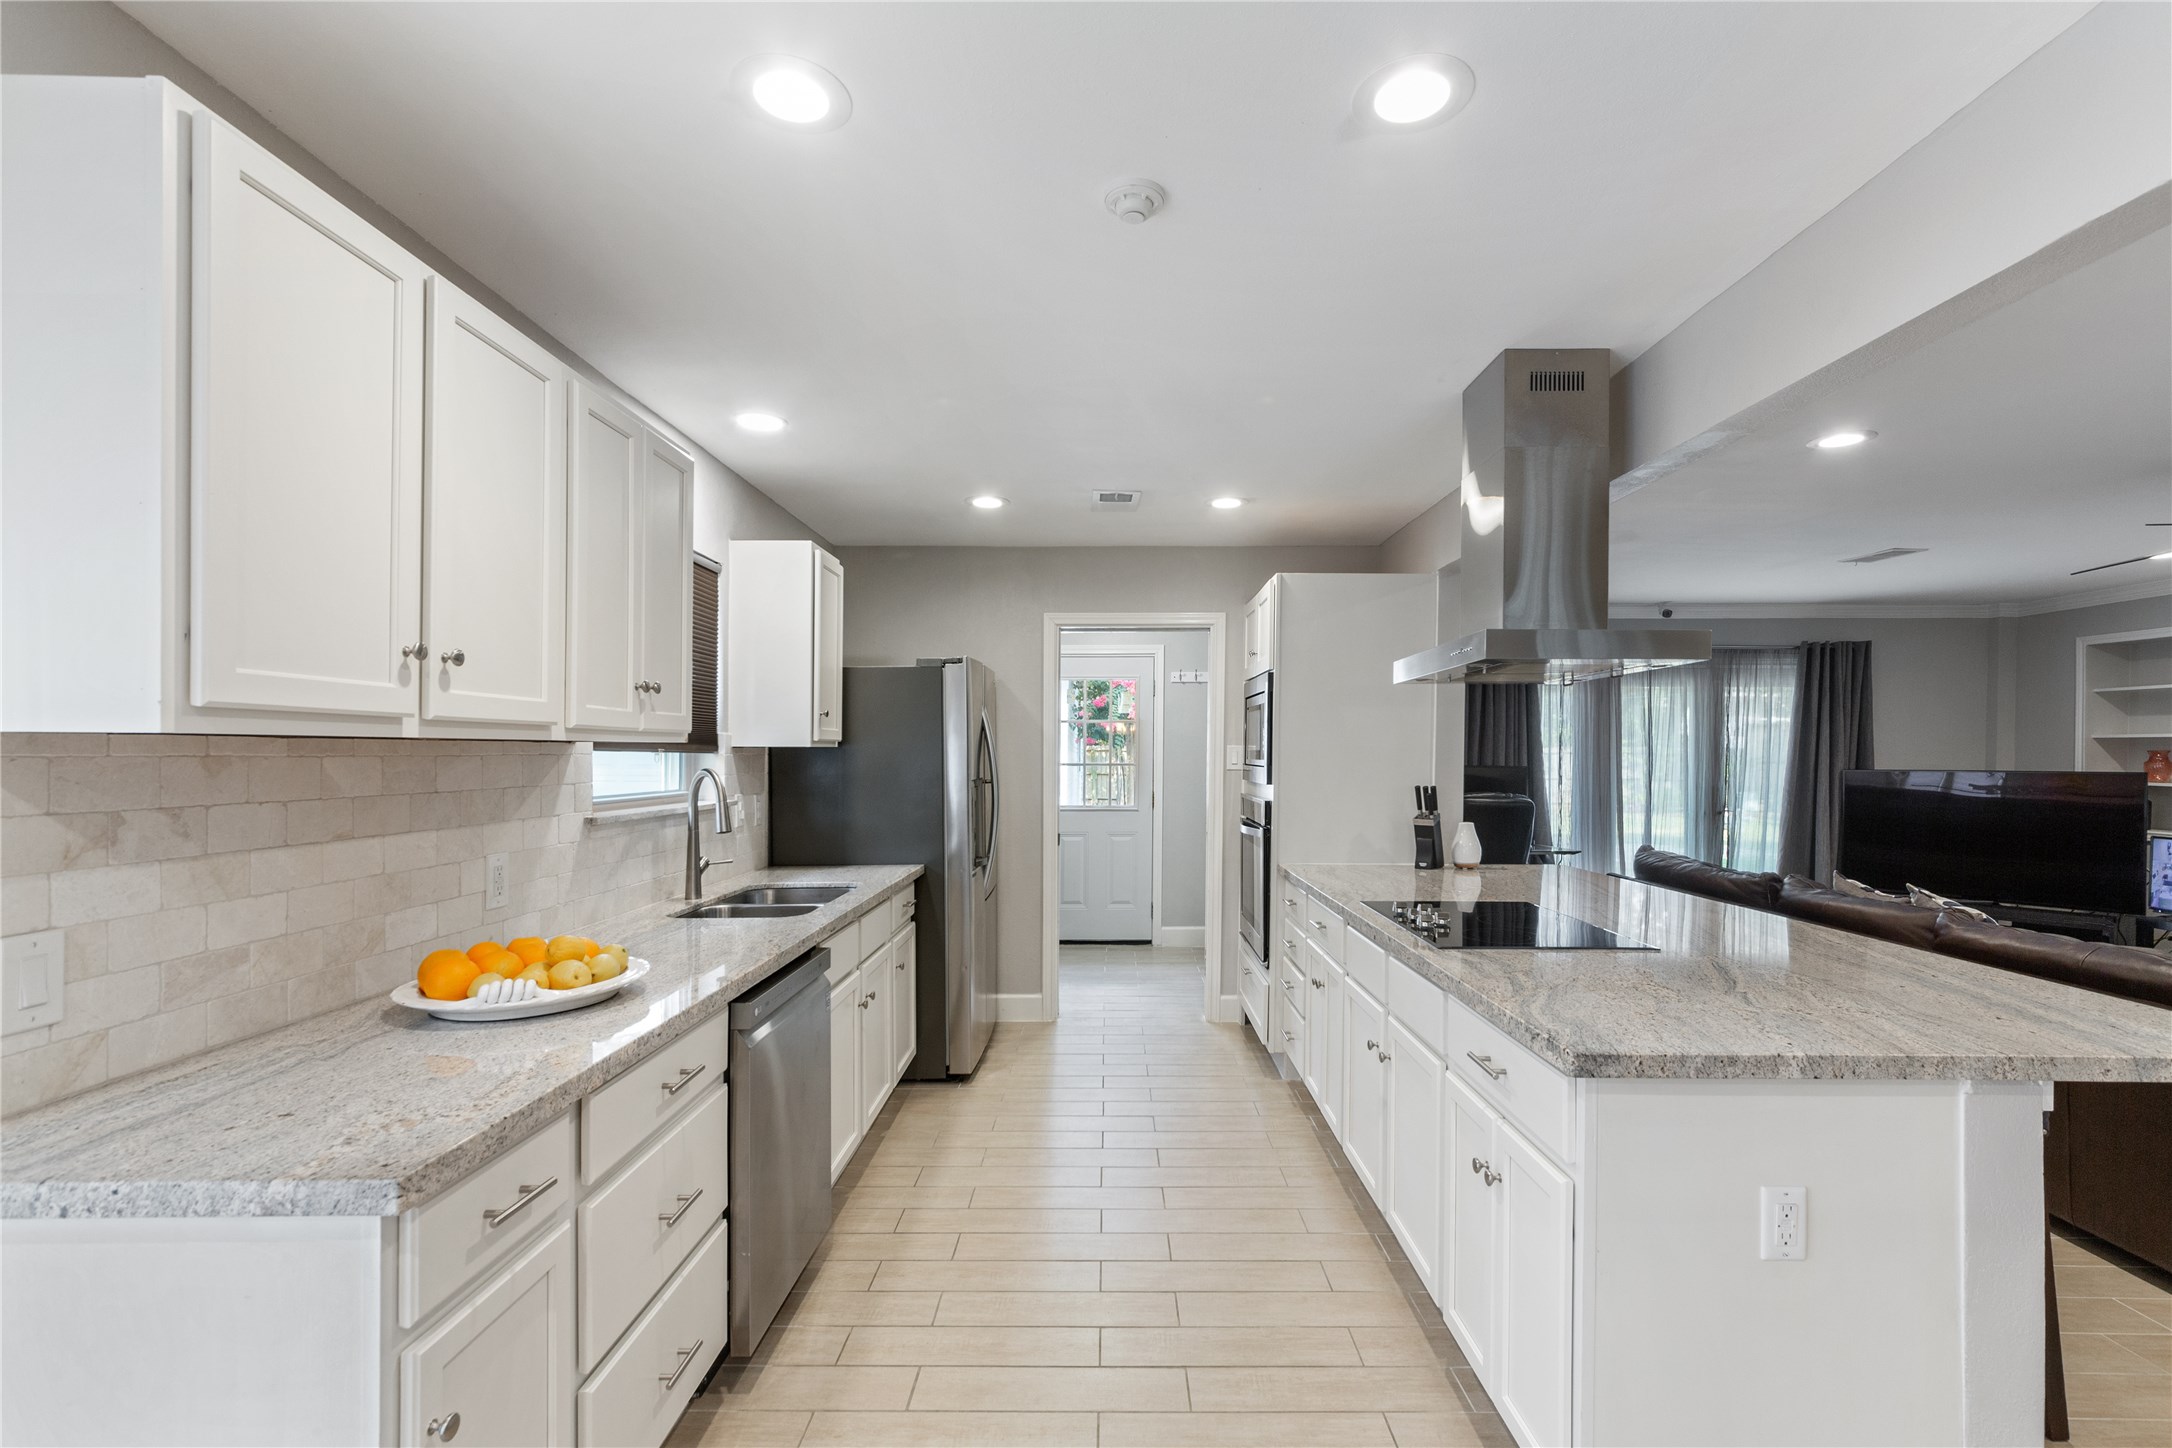 You will love the gorgeous granite countertops.  Stainless steel appliances fit in perfectly along with the overhead venthood which is both useful and beautiful.